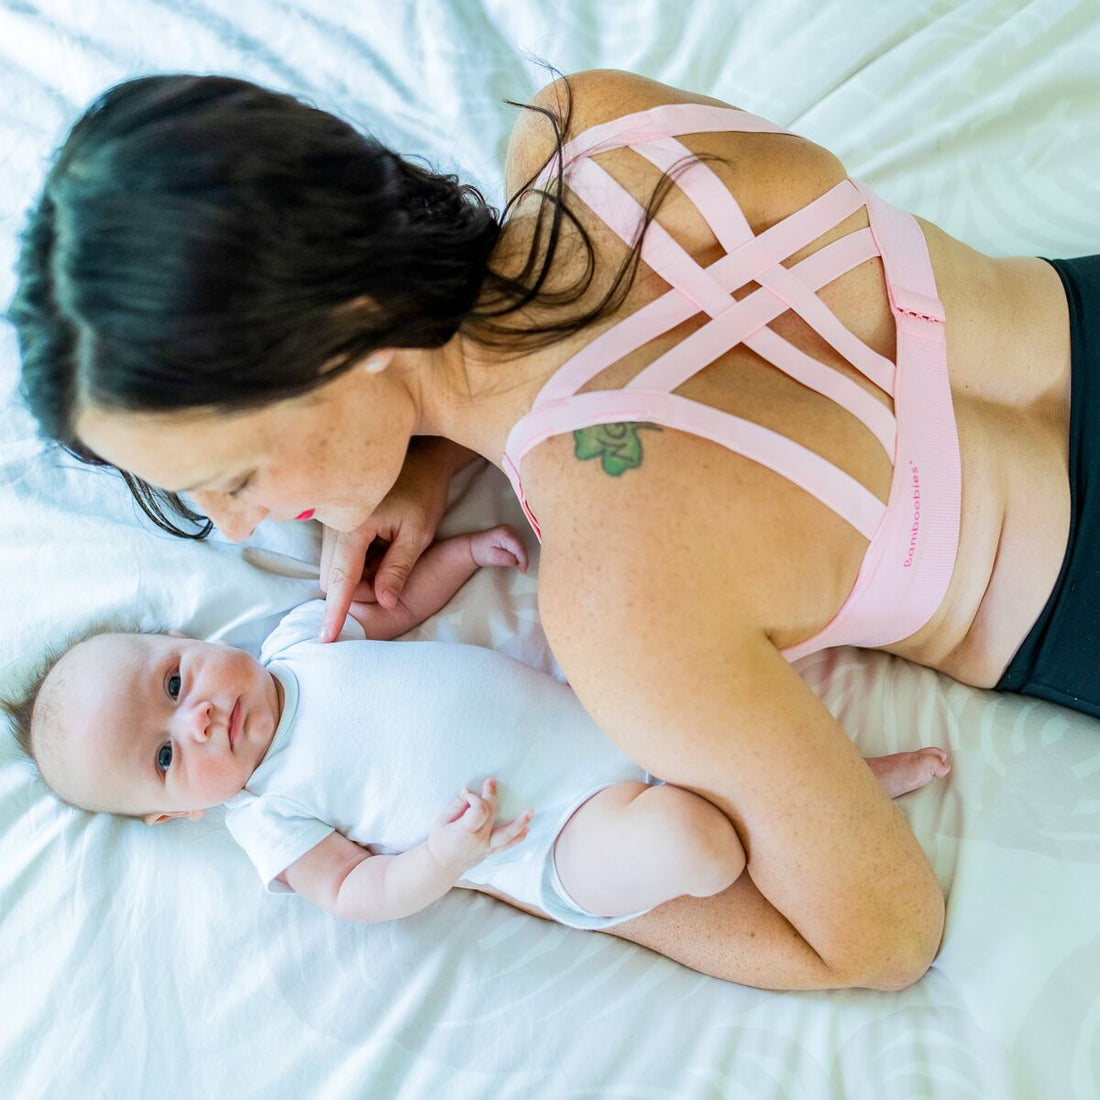 Bra fitting for pregnancy, breastfeeding and beyond